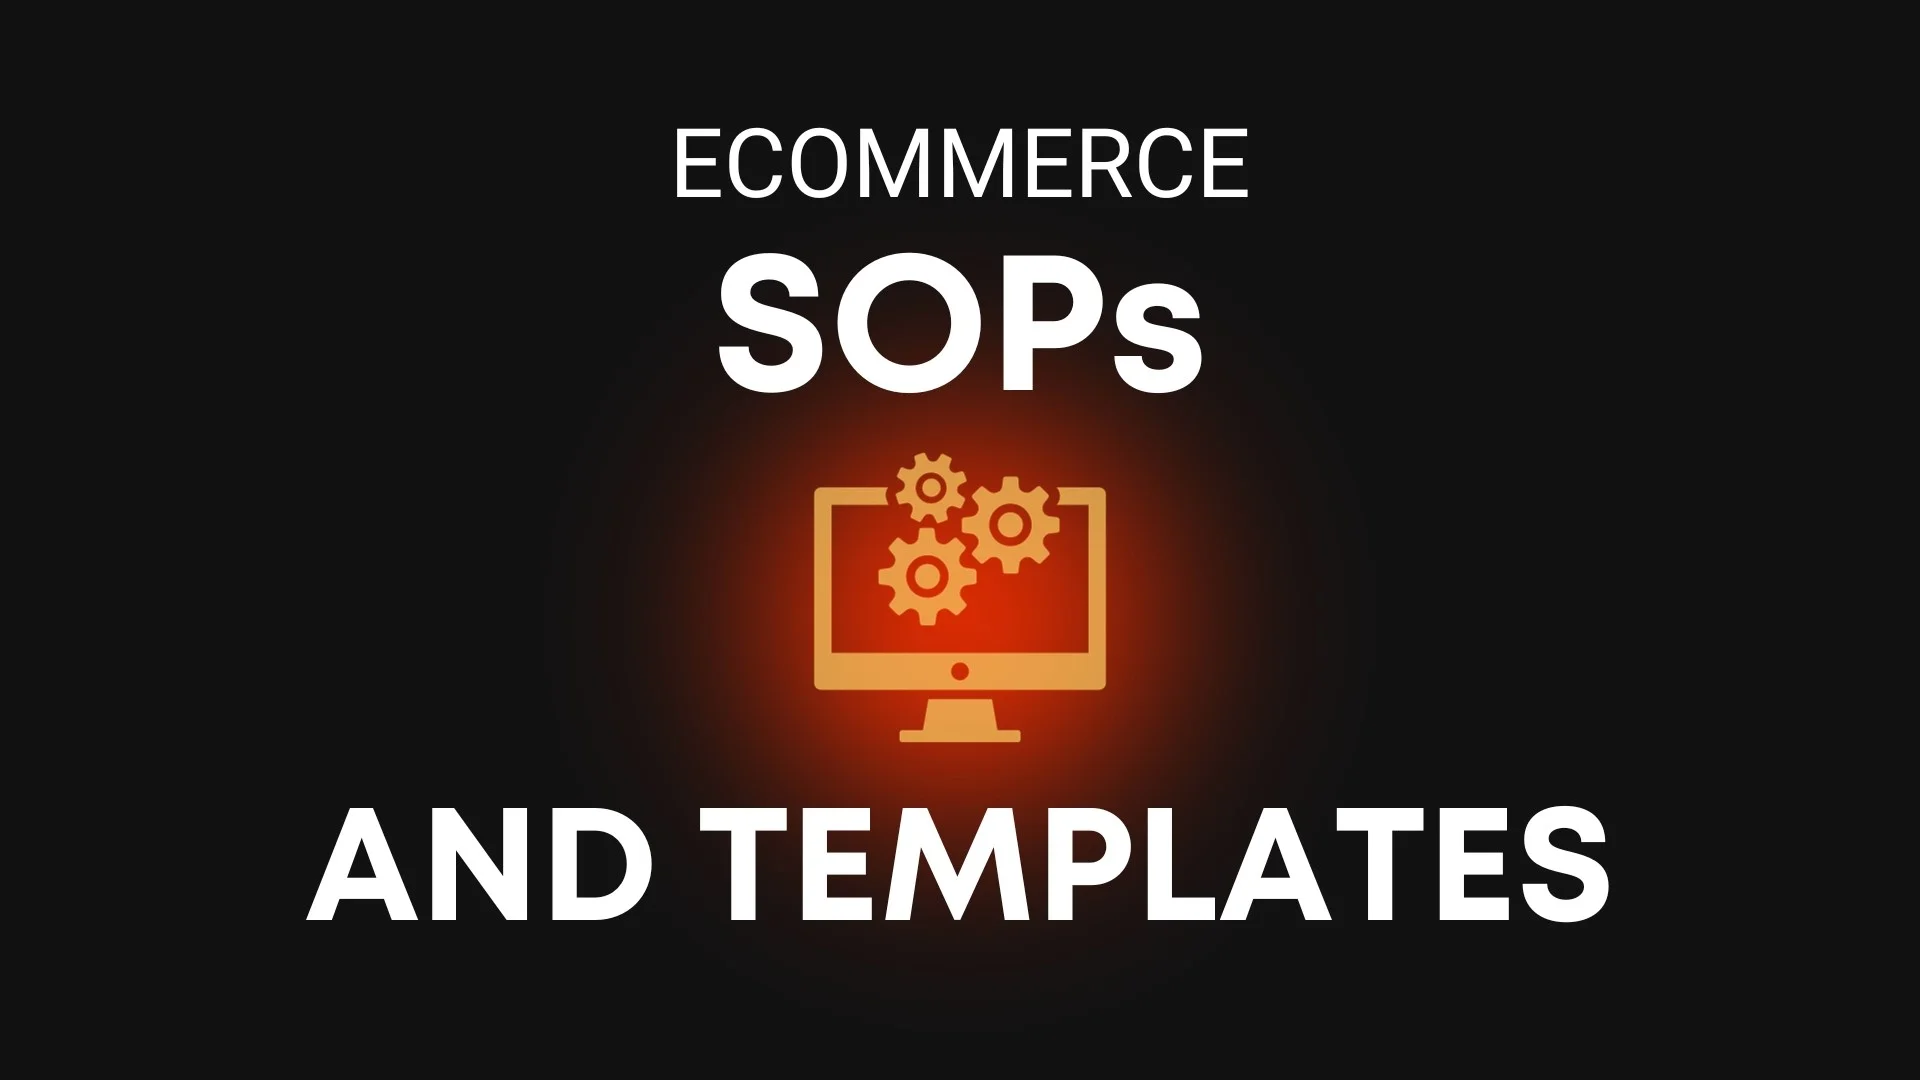 The SOPs, tools and templates